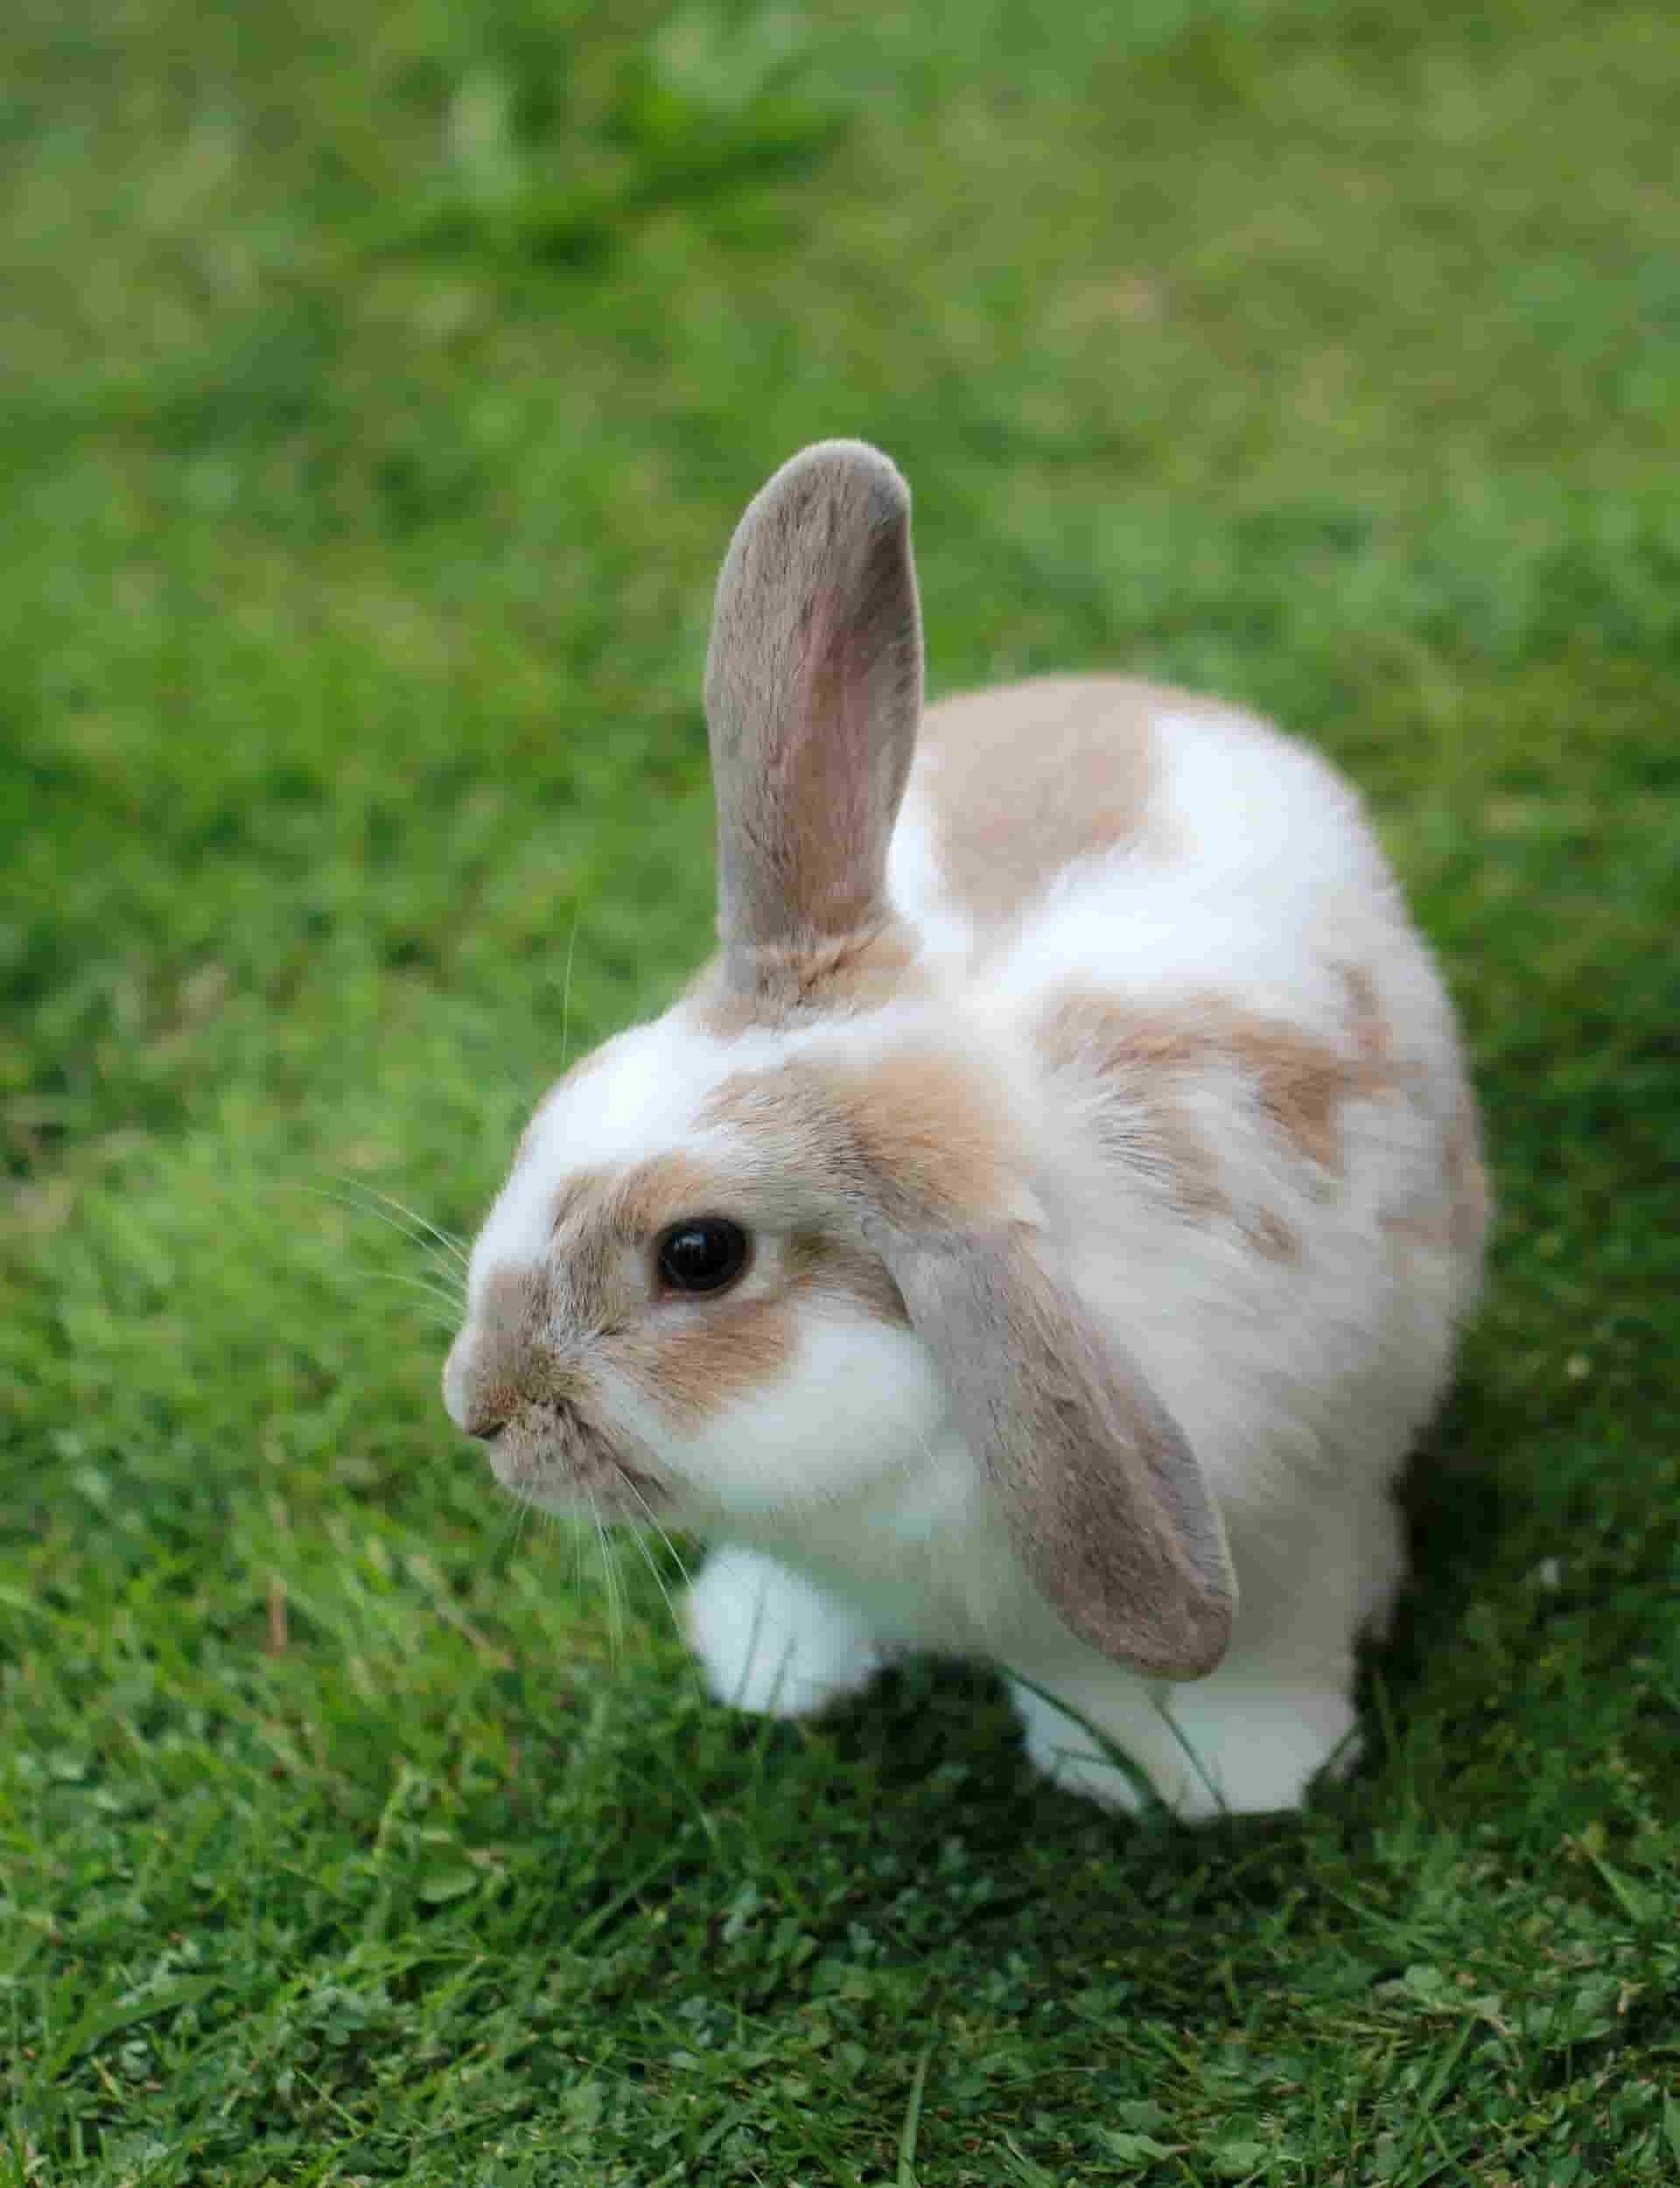 is mint safe for rabbits?